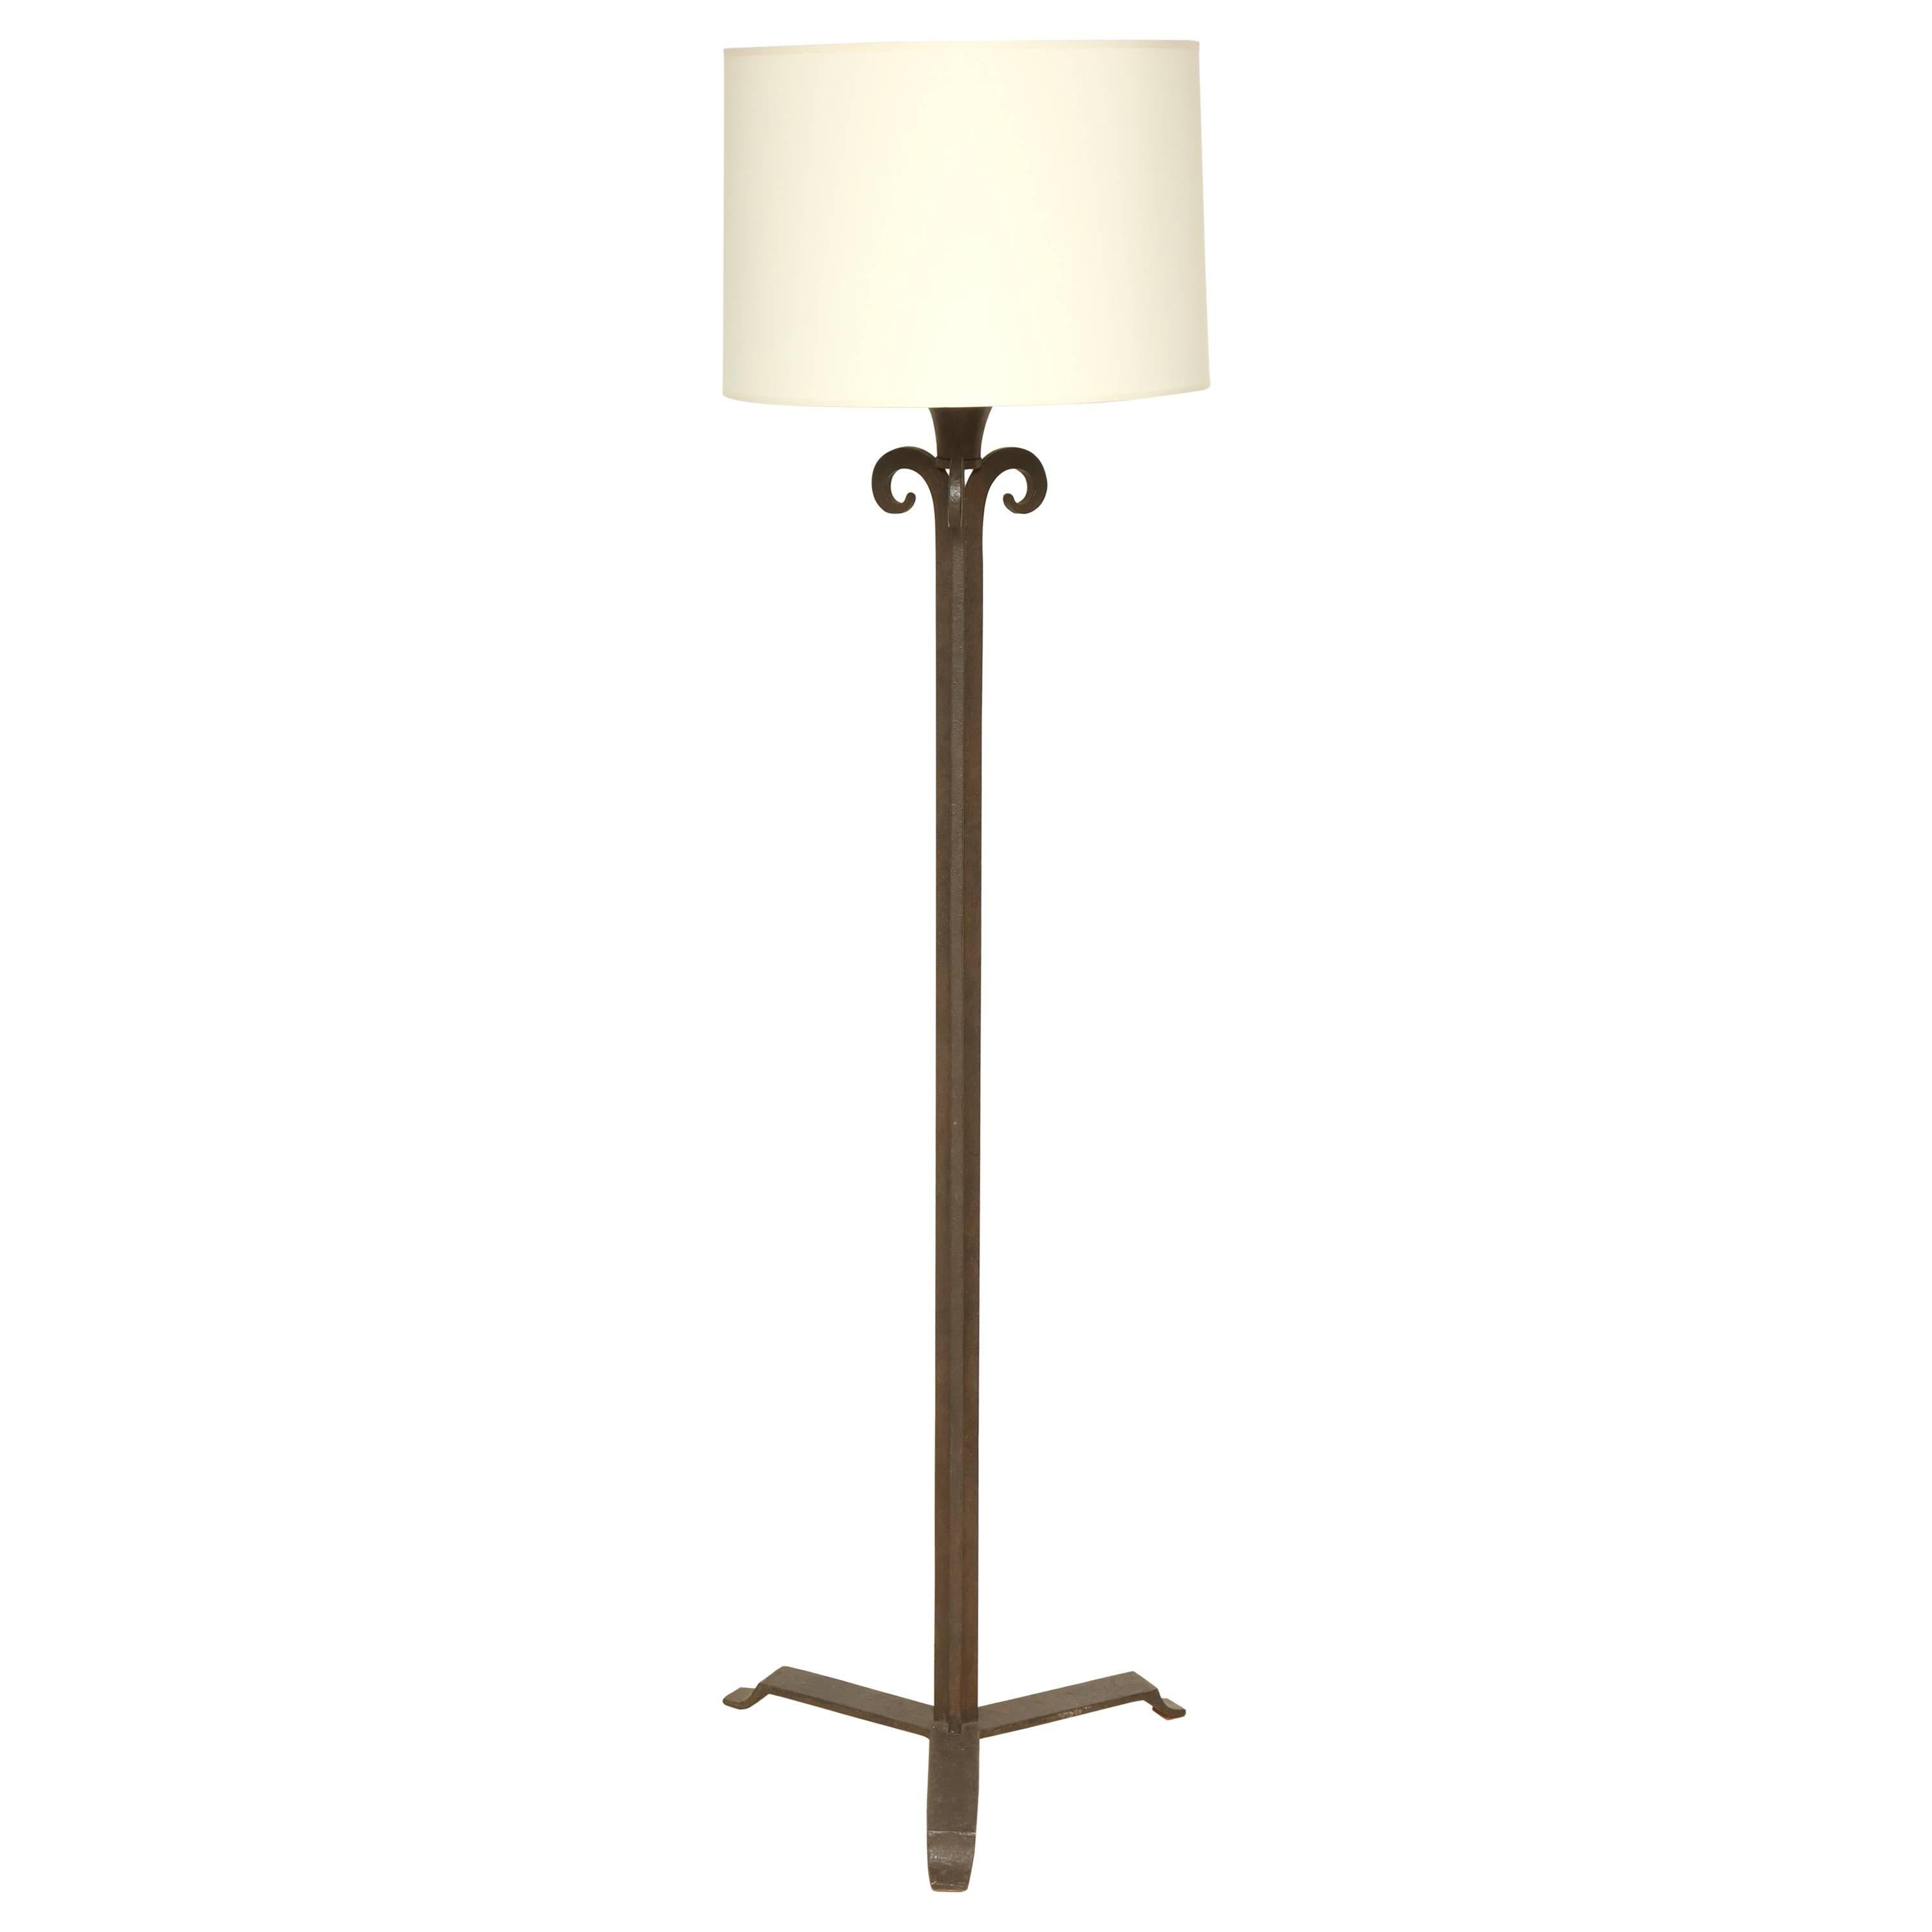 Textured Iron Standing Lamp on Tripod Base, France, circa 1940 For Sale